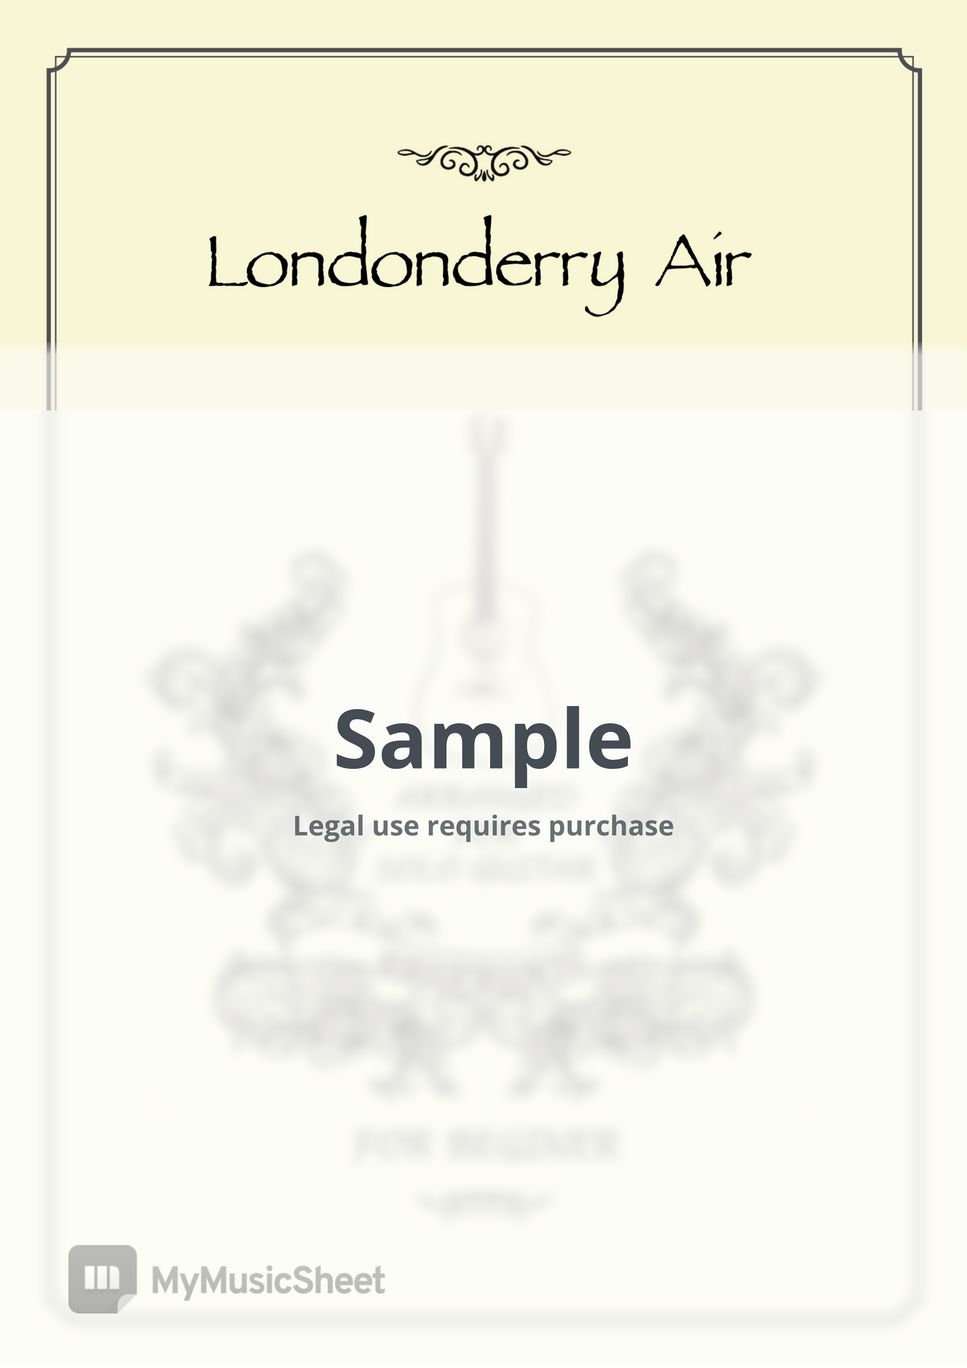 Londonderry Air by GEOPHONIC